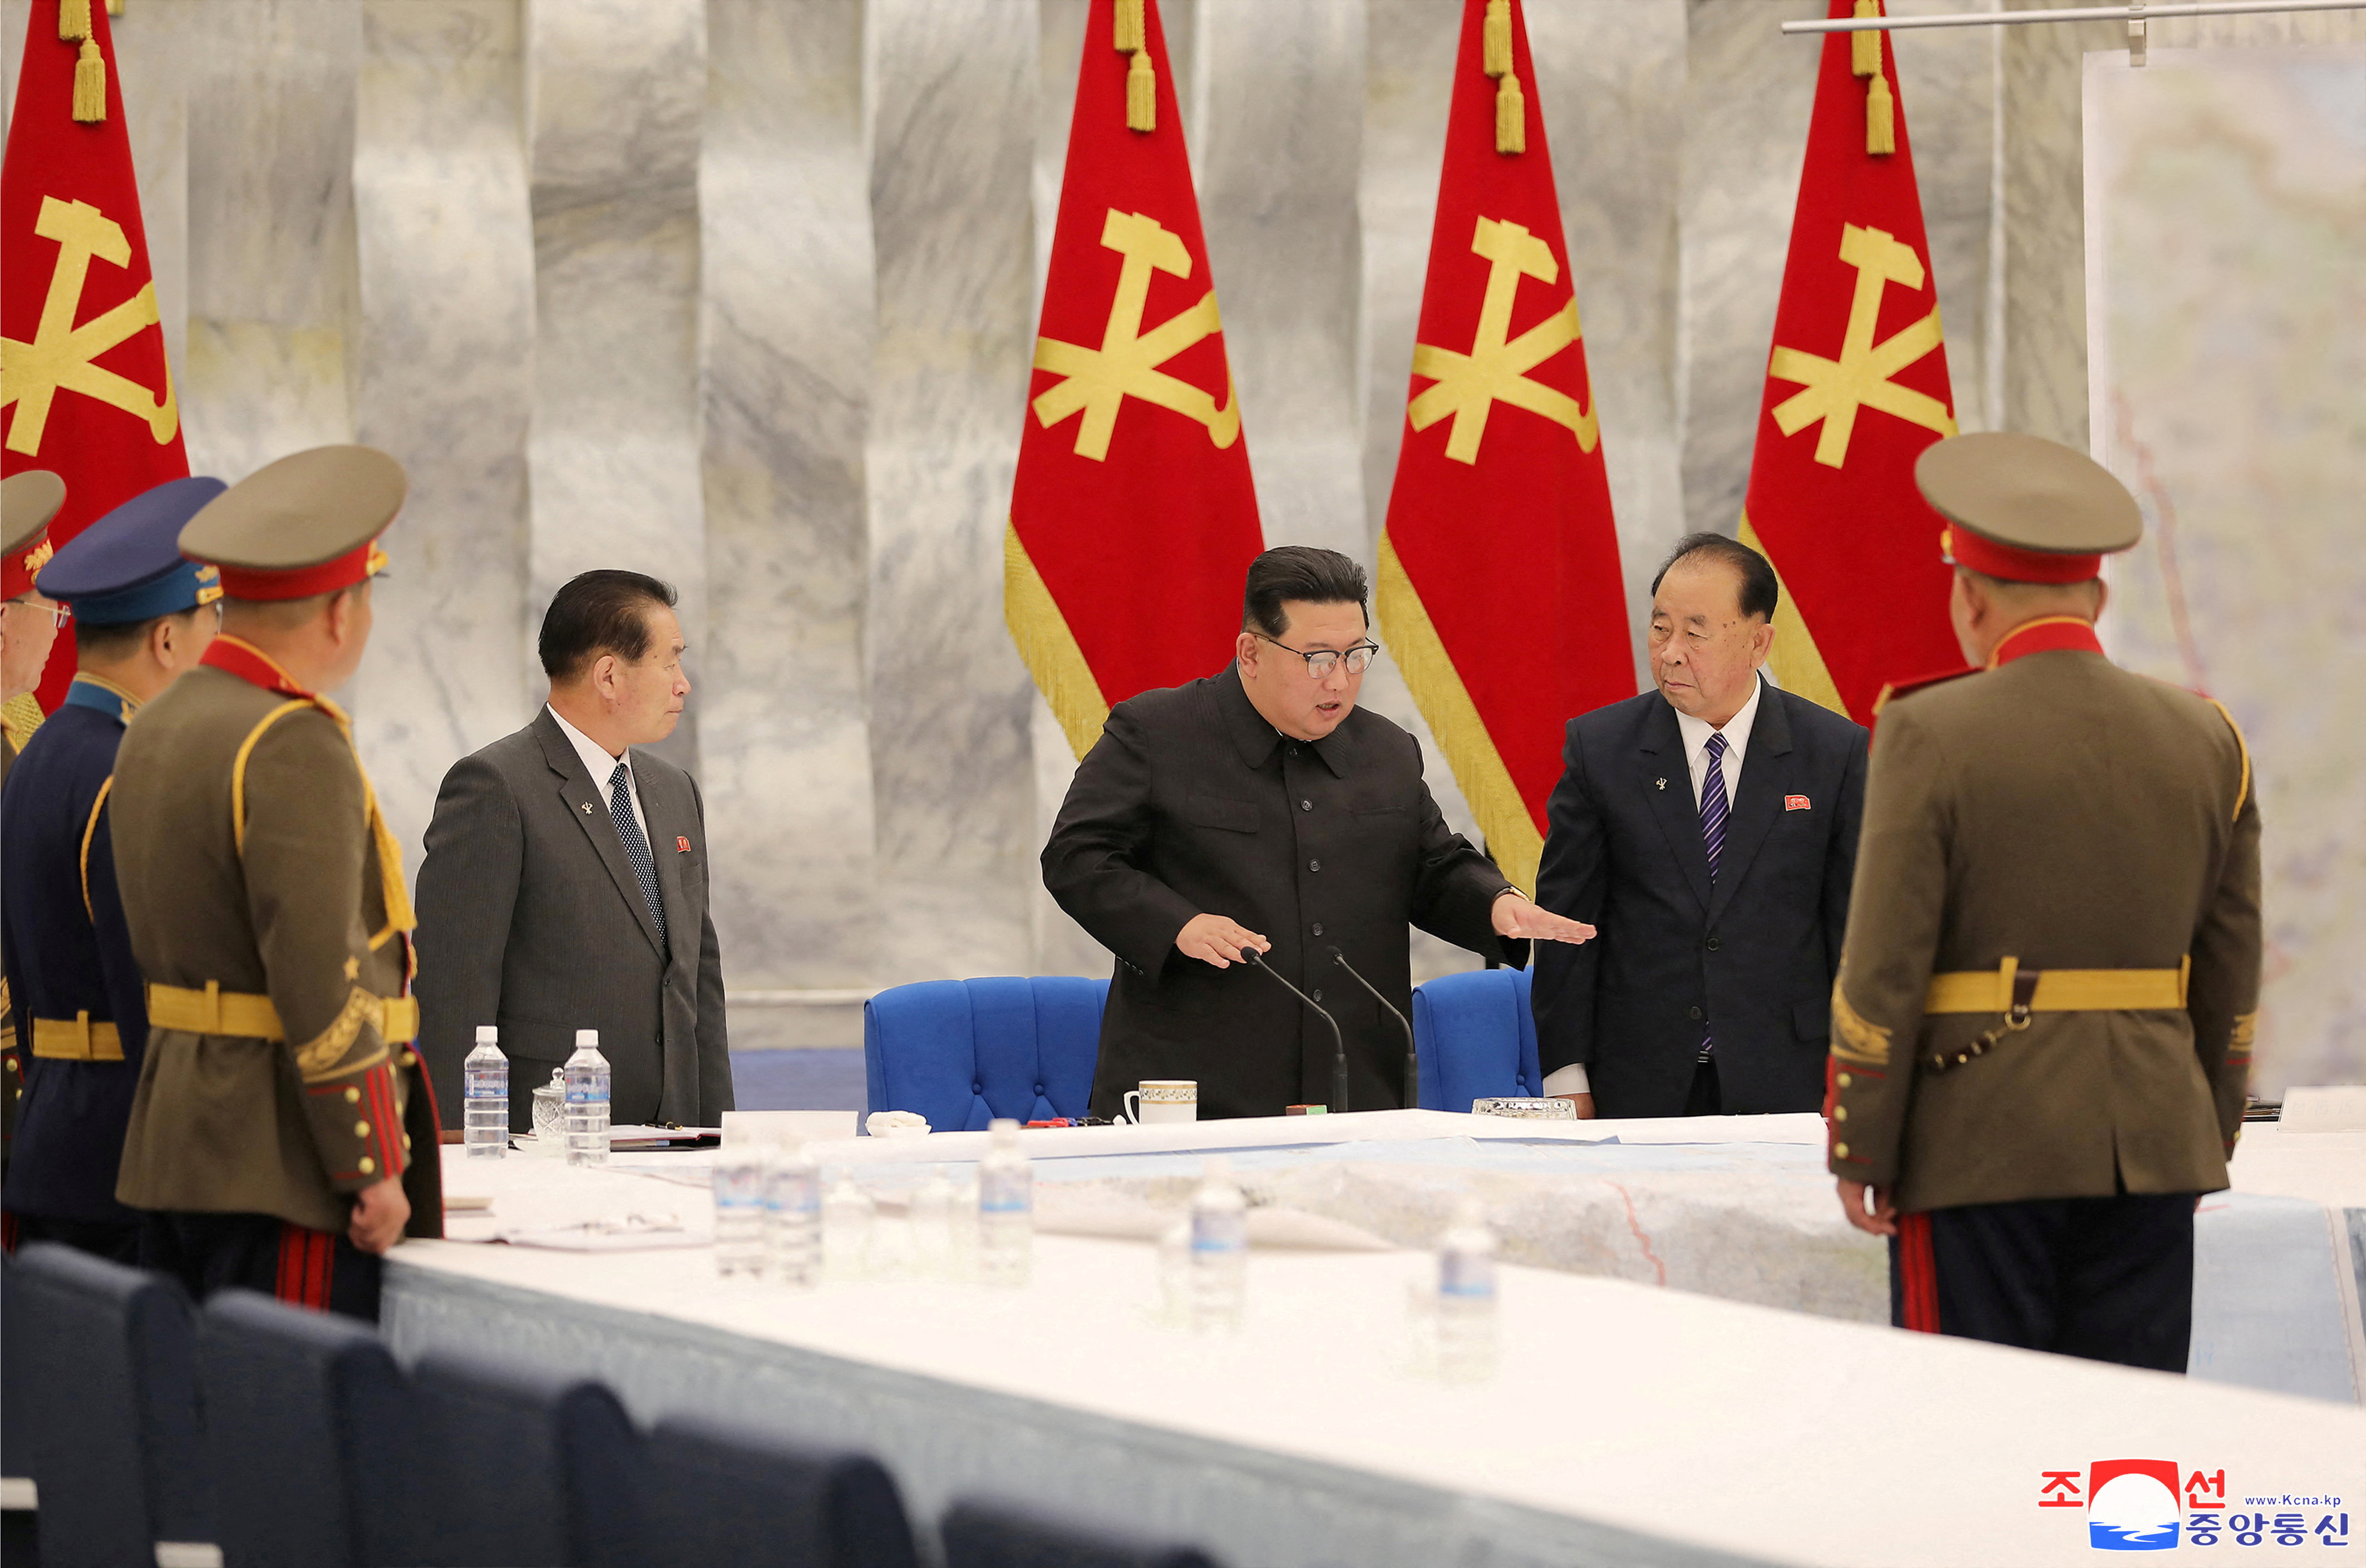 North Korean leader Kim Jong Un oversees military meeting amid potential nuclear test